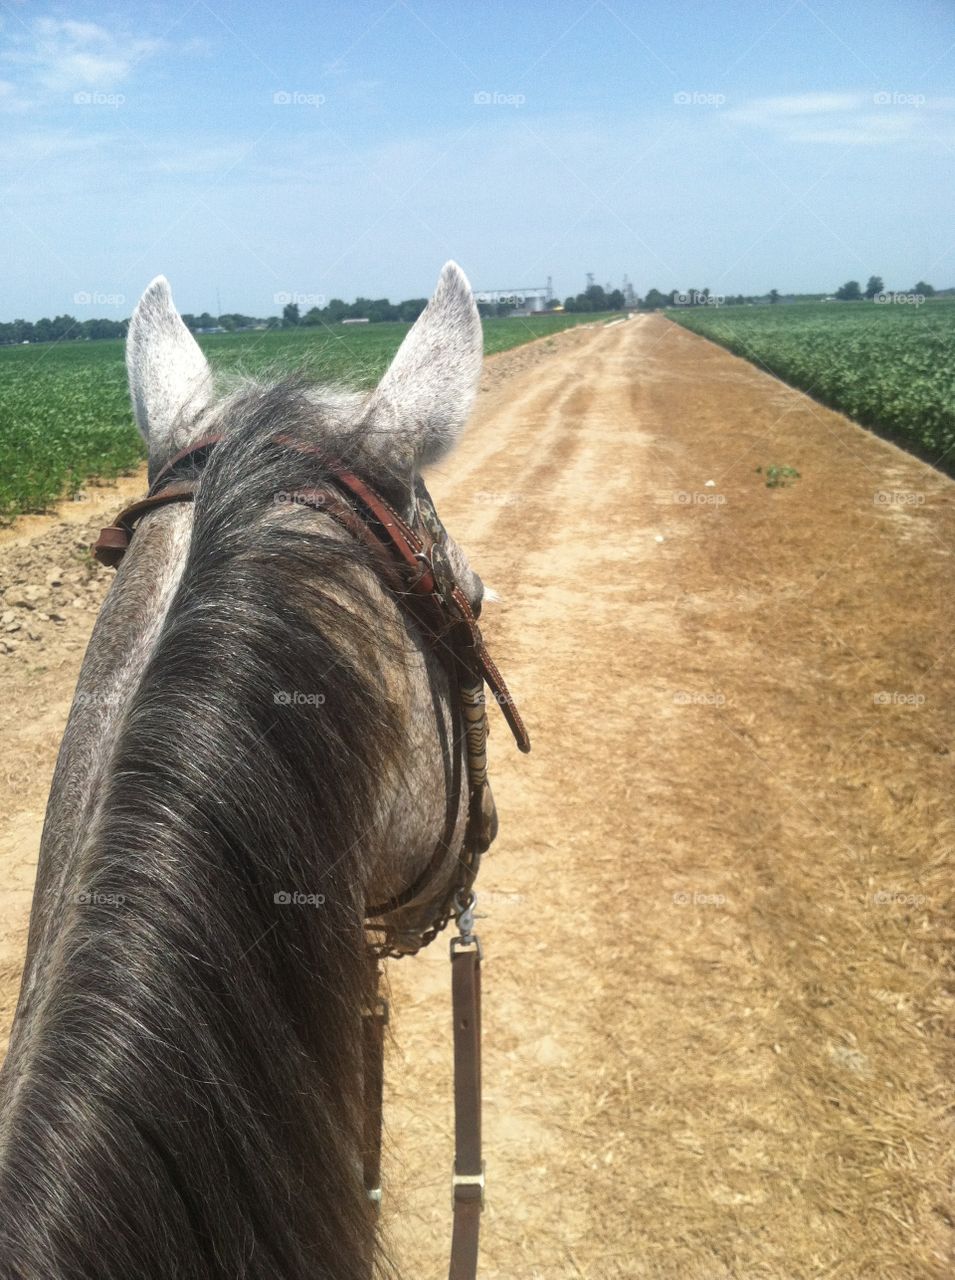 Horseback riding down a dirt turn row in the Mississippi Delta 